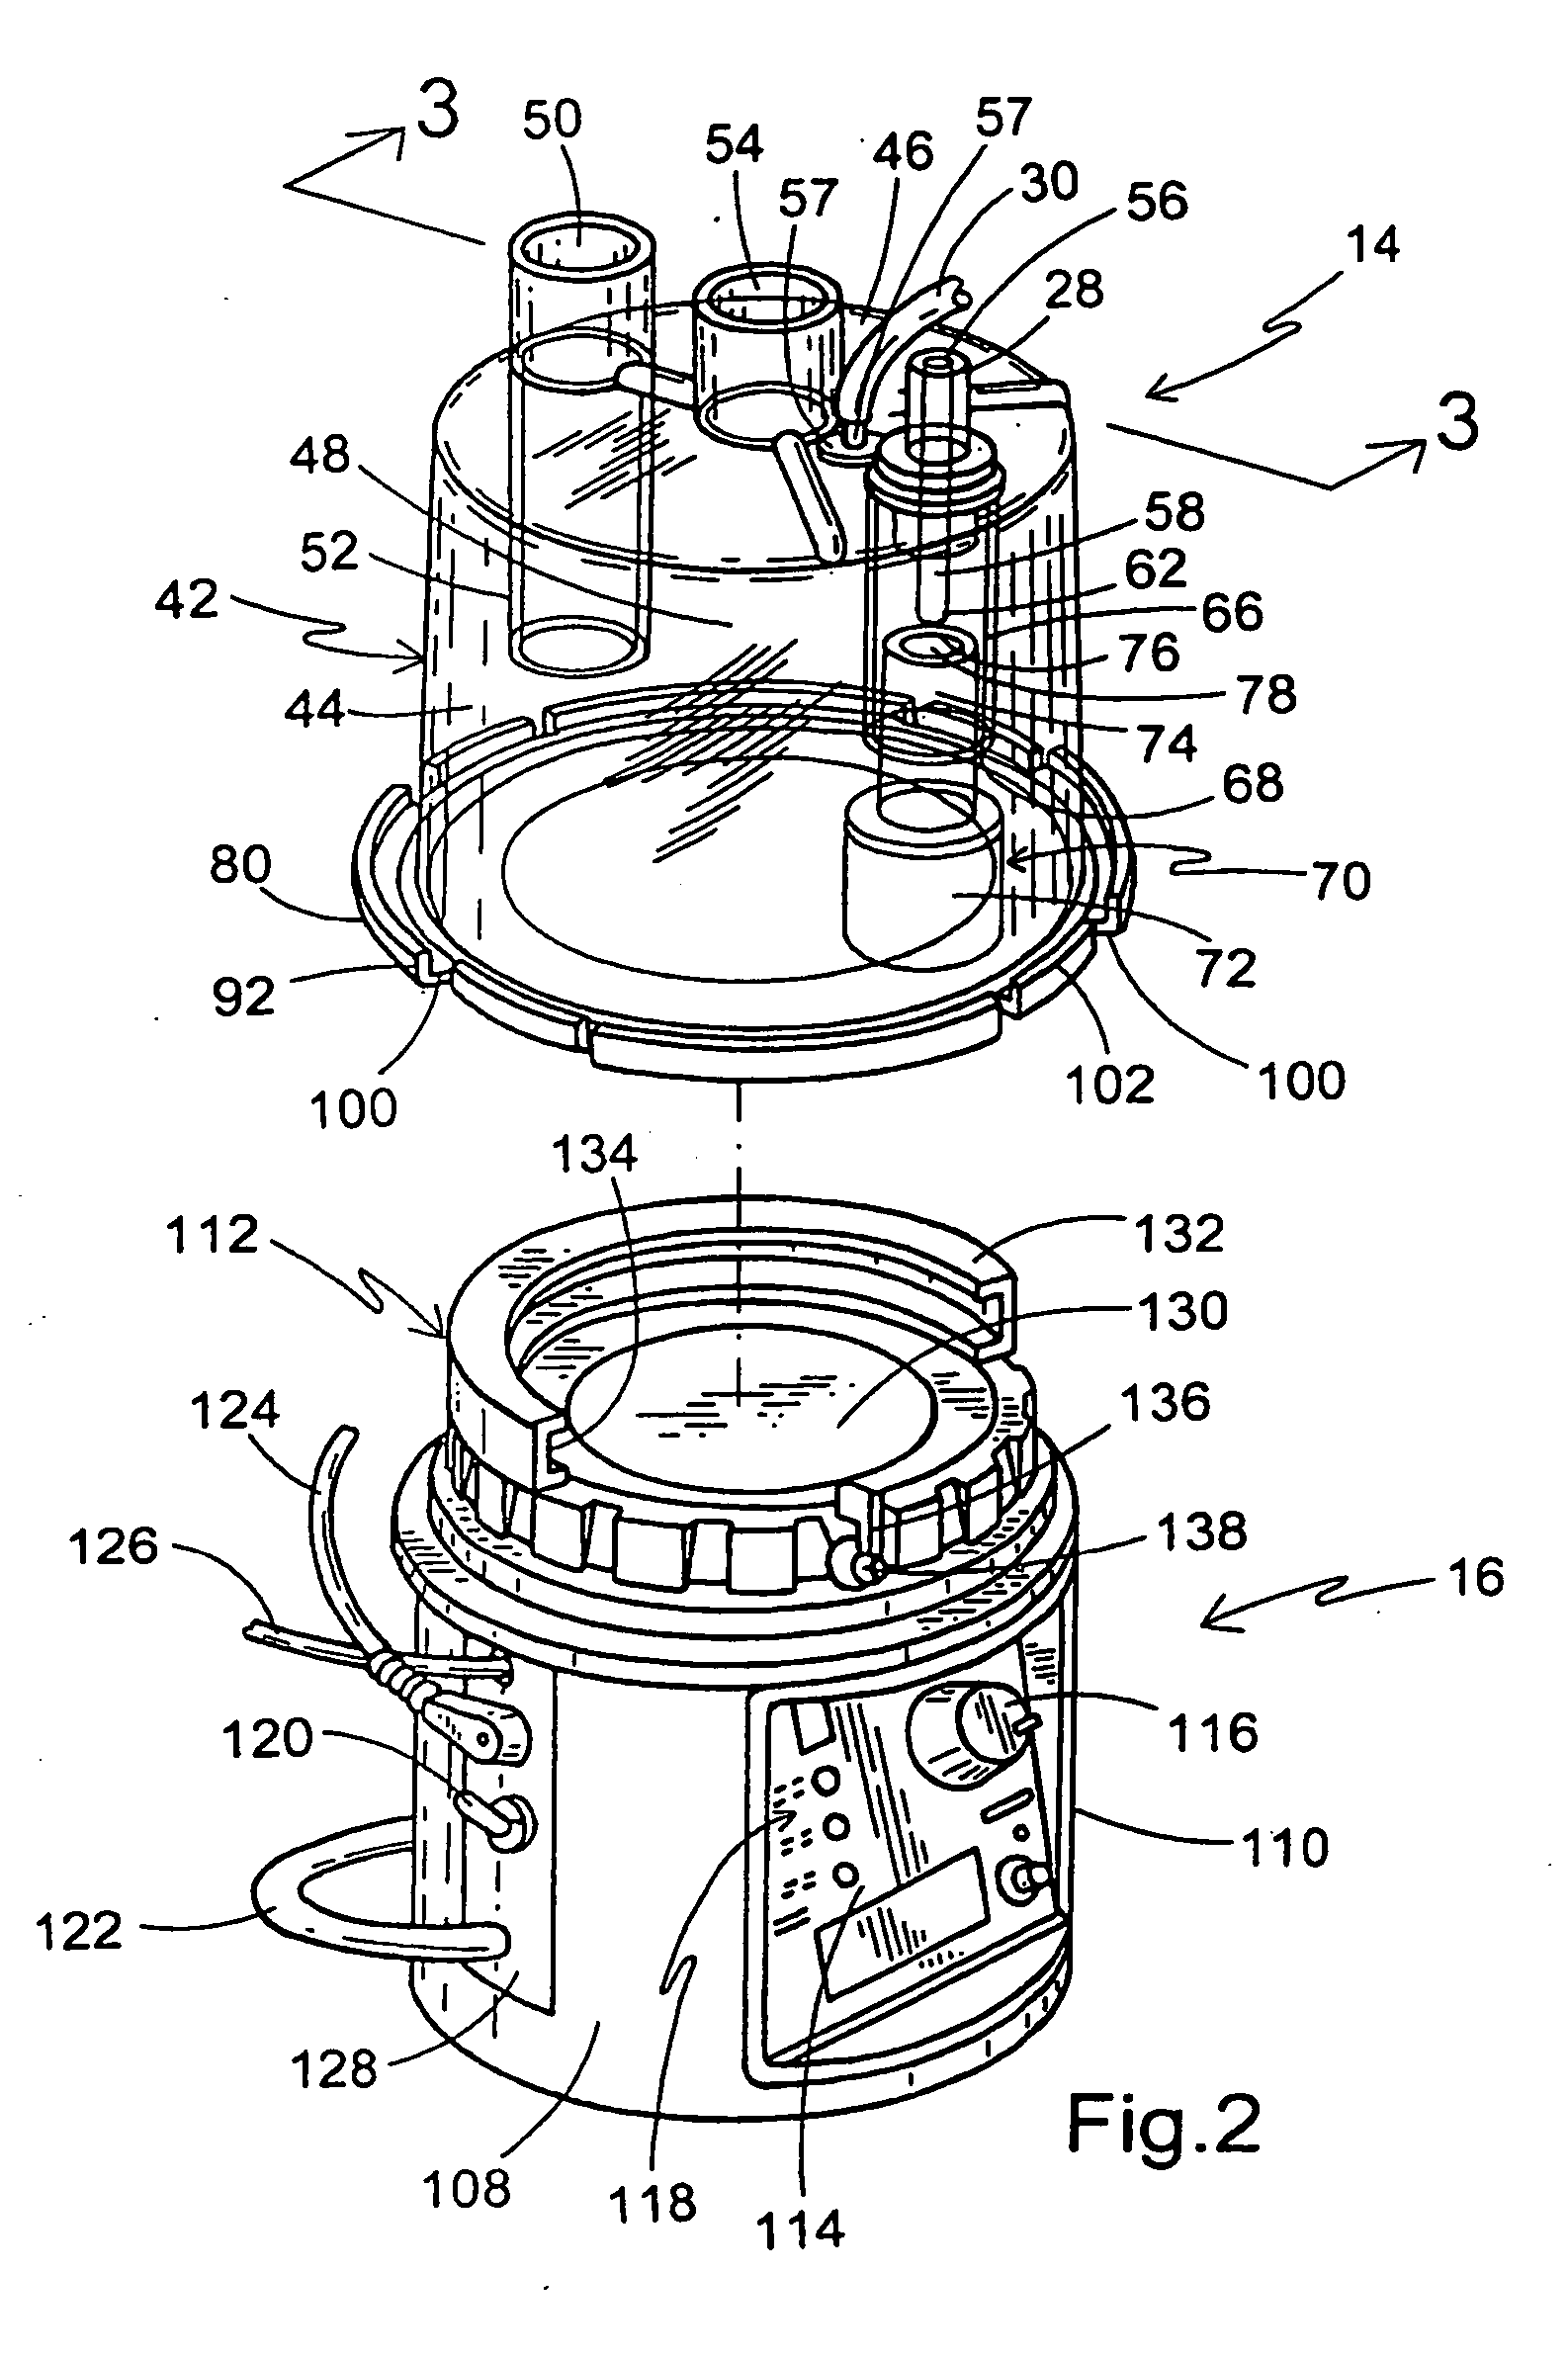 Apparatus for equalizing air pressure in an air respiratory system